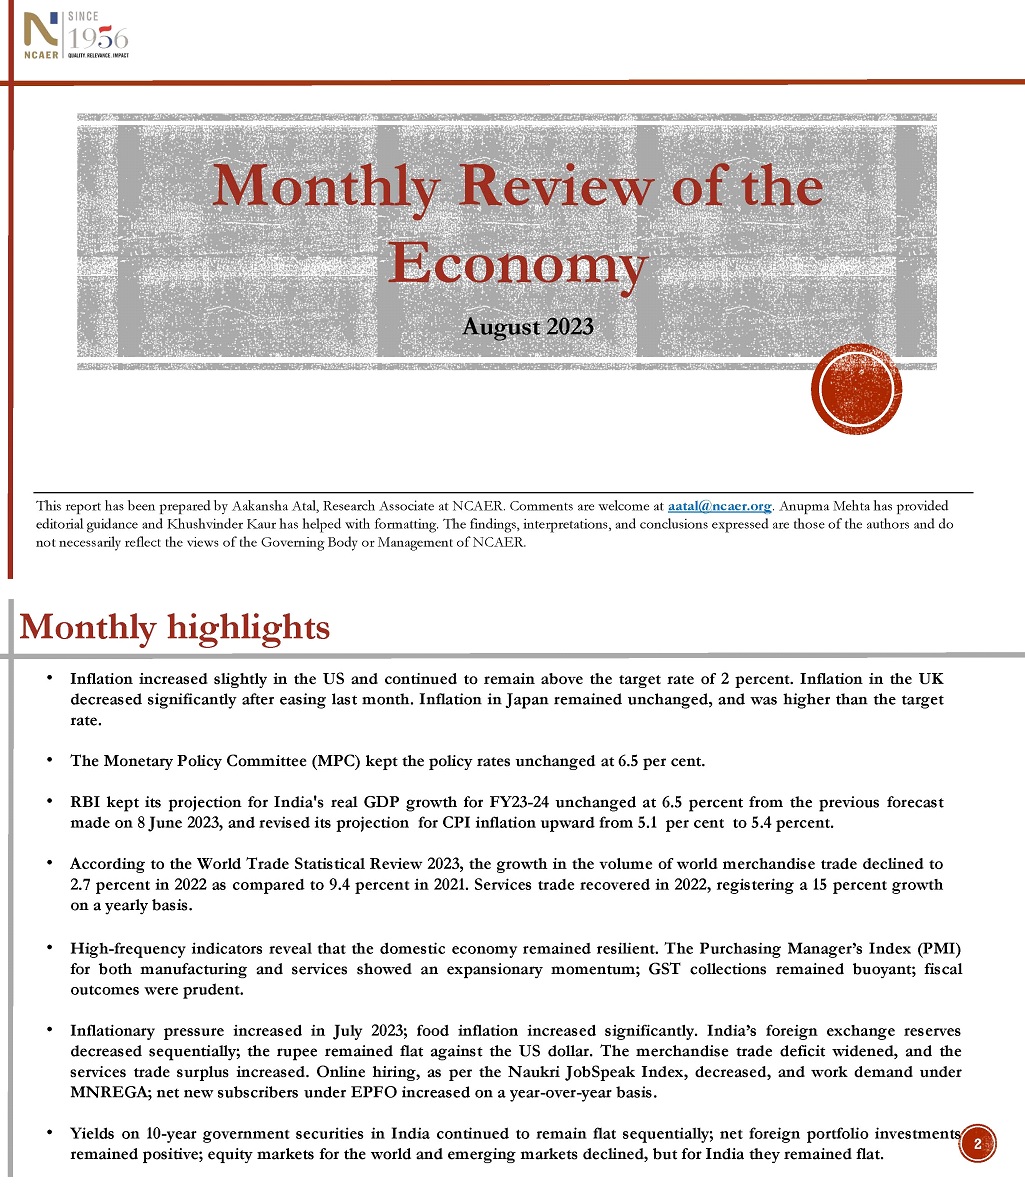 Monthly Review of the Economy: August 2023